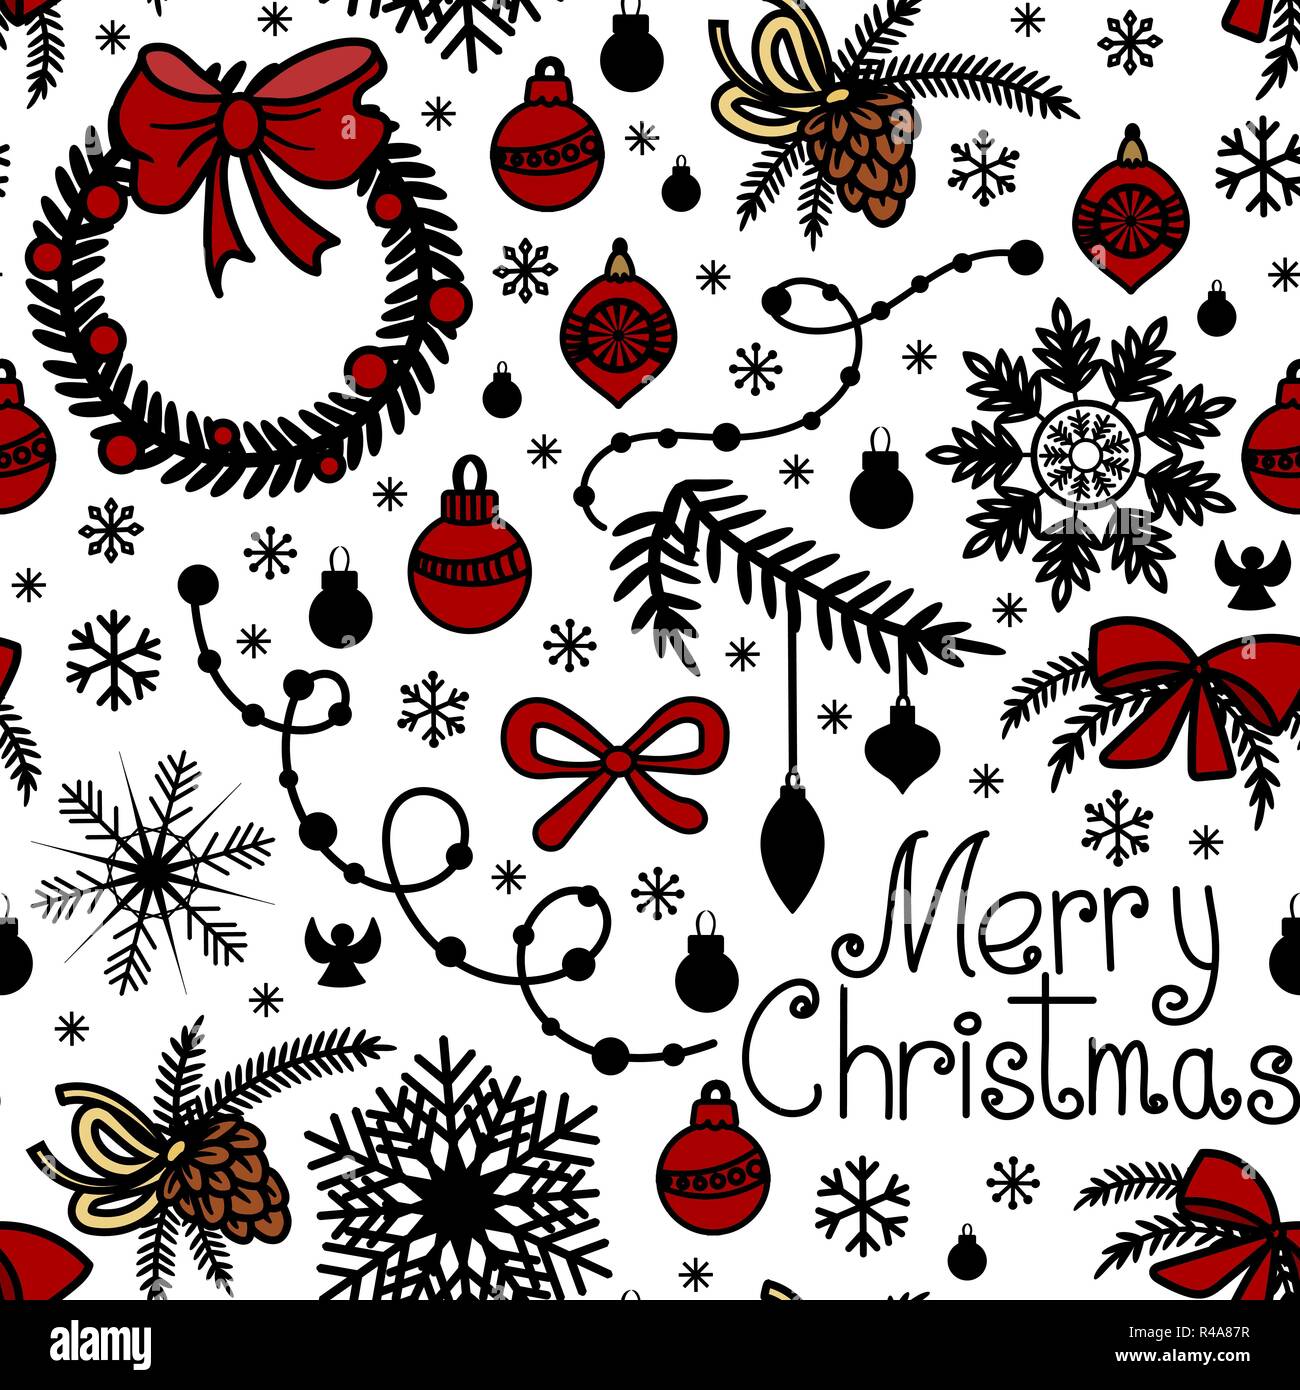 Christmas background in hand drawn doodle style. Red and black colors ...